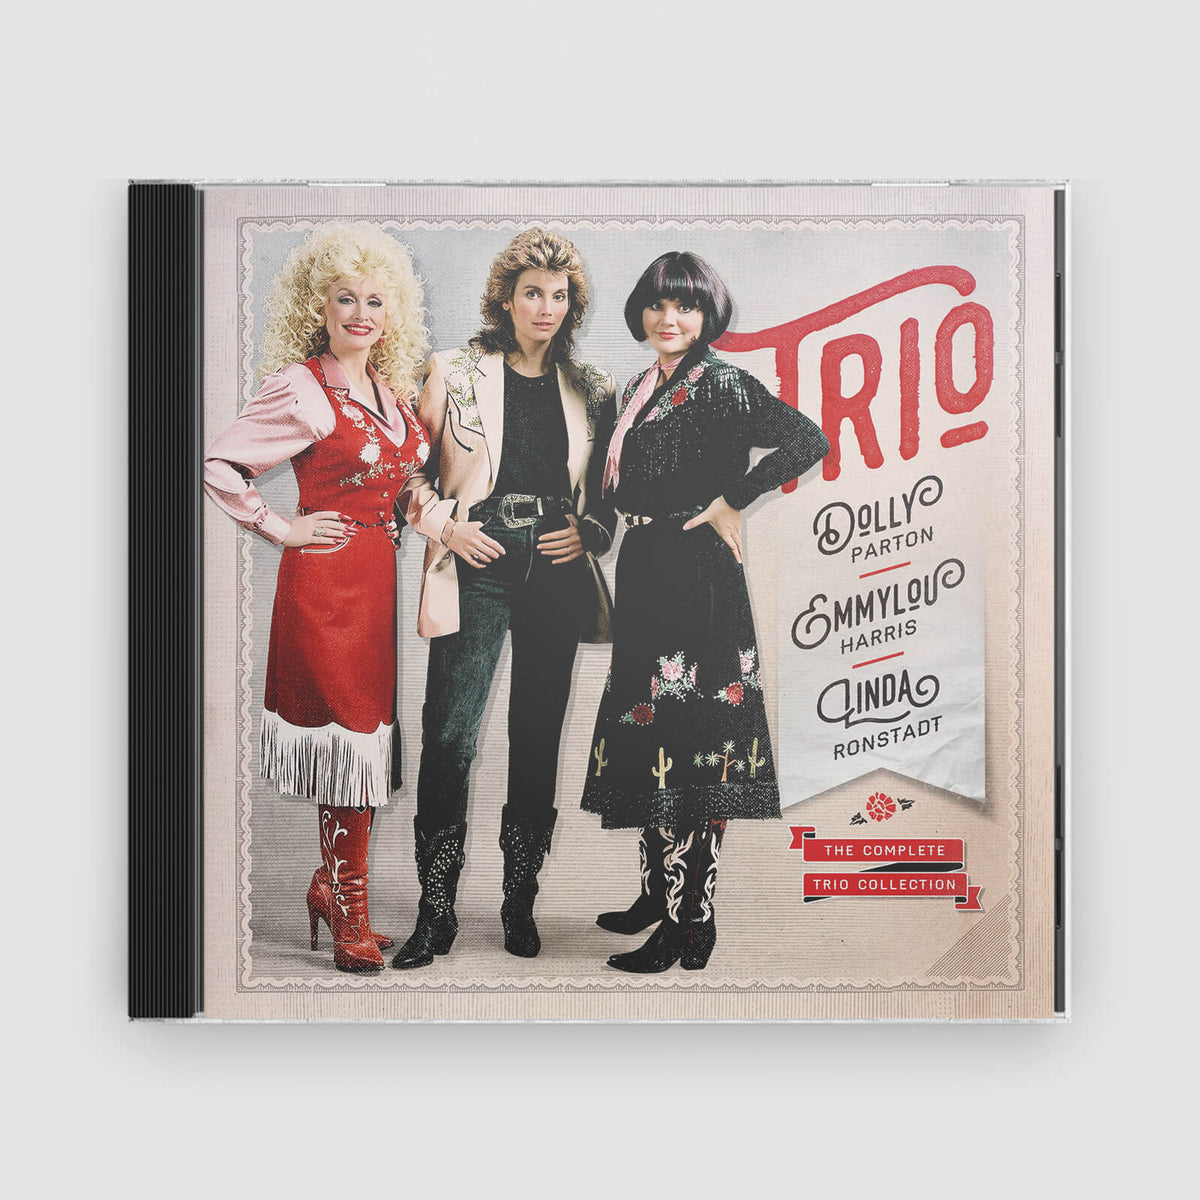 Dolly Parton, Linda Ronstadt &amp; : The Complete Trio Collection